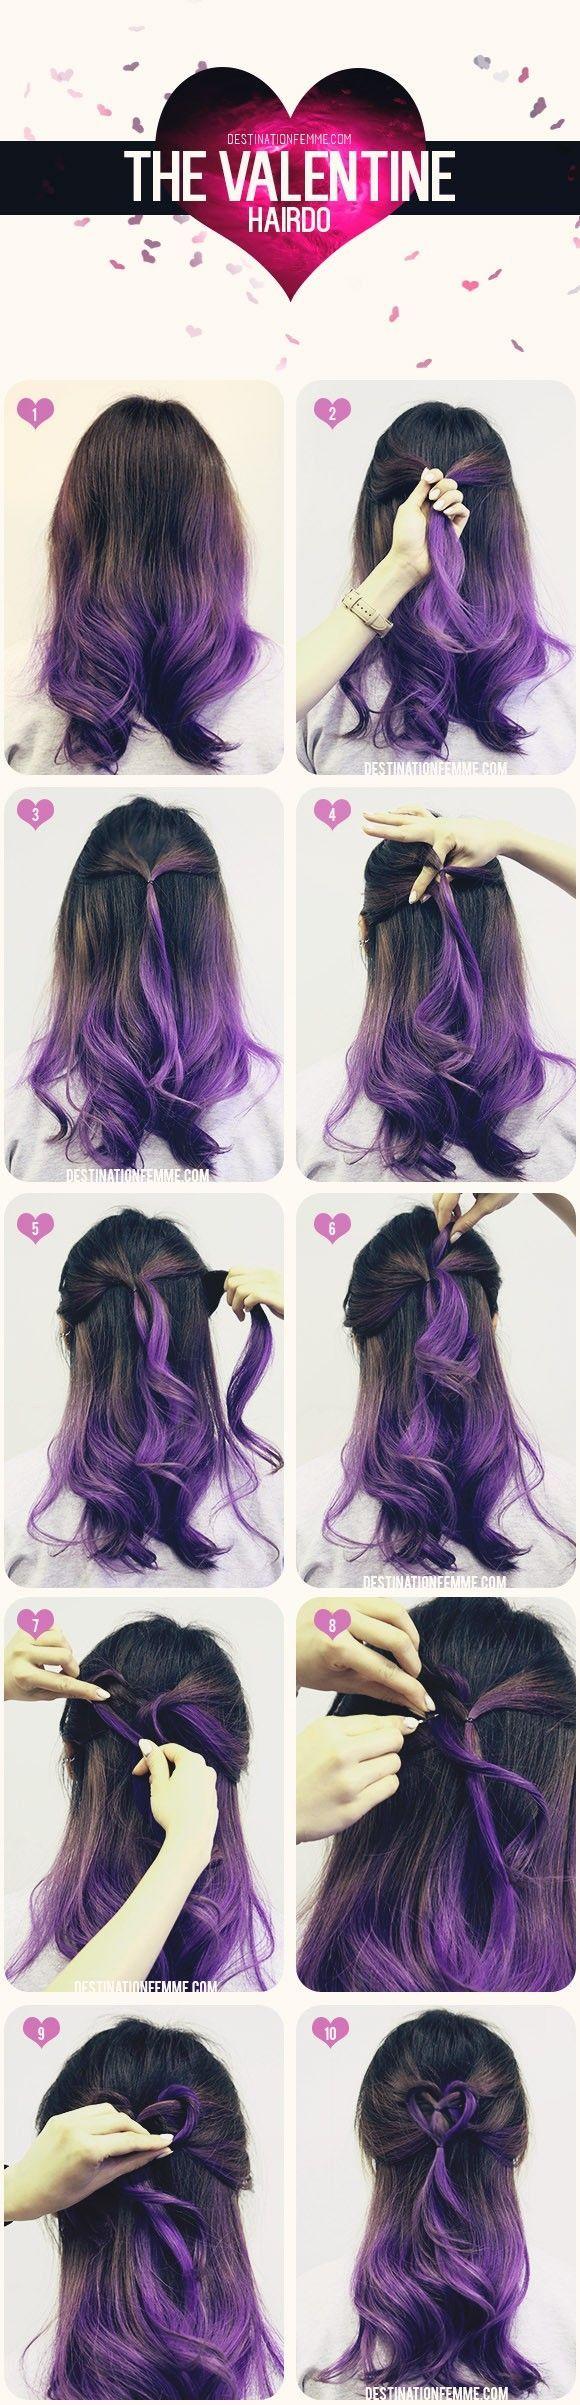 Wedding - 6 Hairstyles For Valentines Day